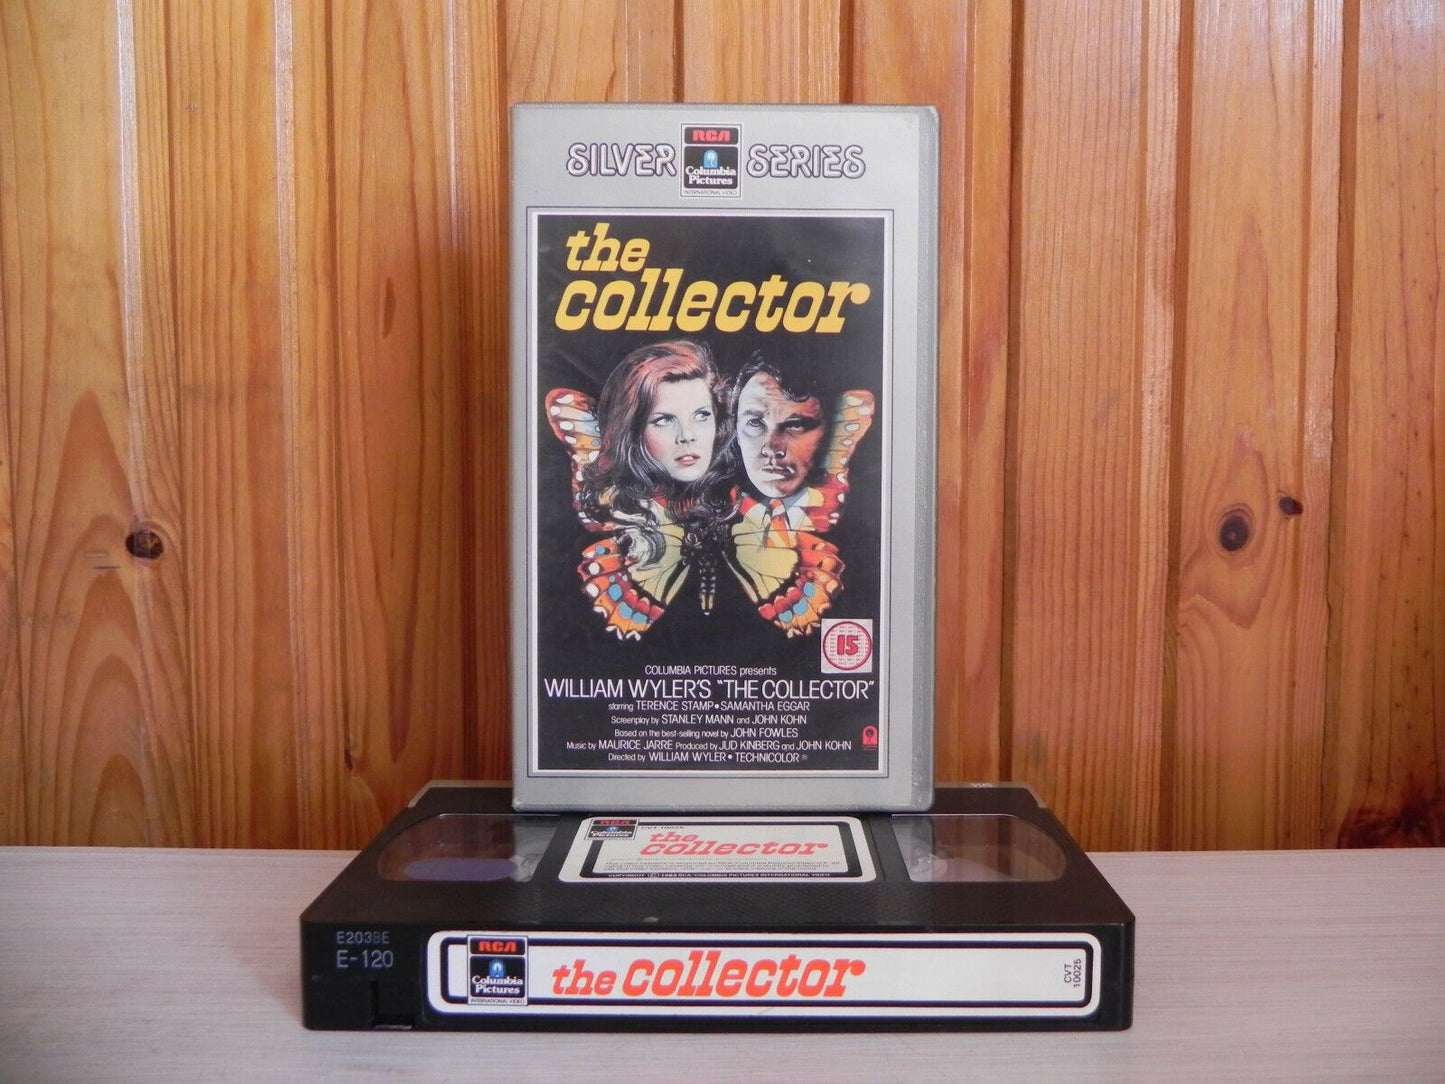 The Collector - Terrence Stamp - RCA Silver - Crime Thriller - Pre-Cert VHS-